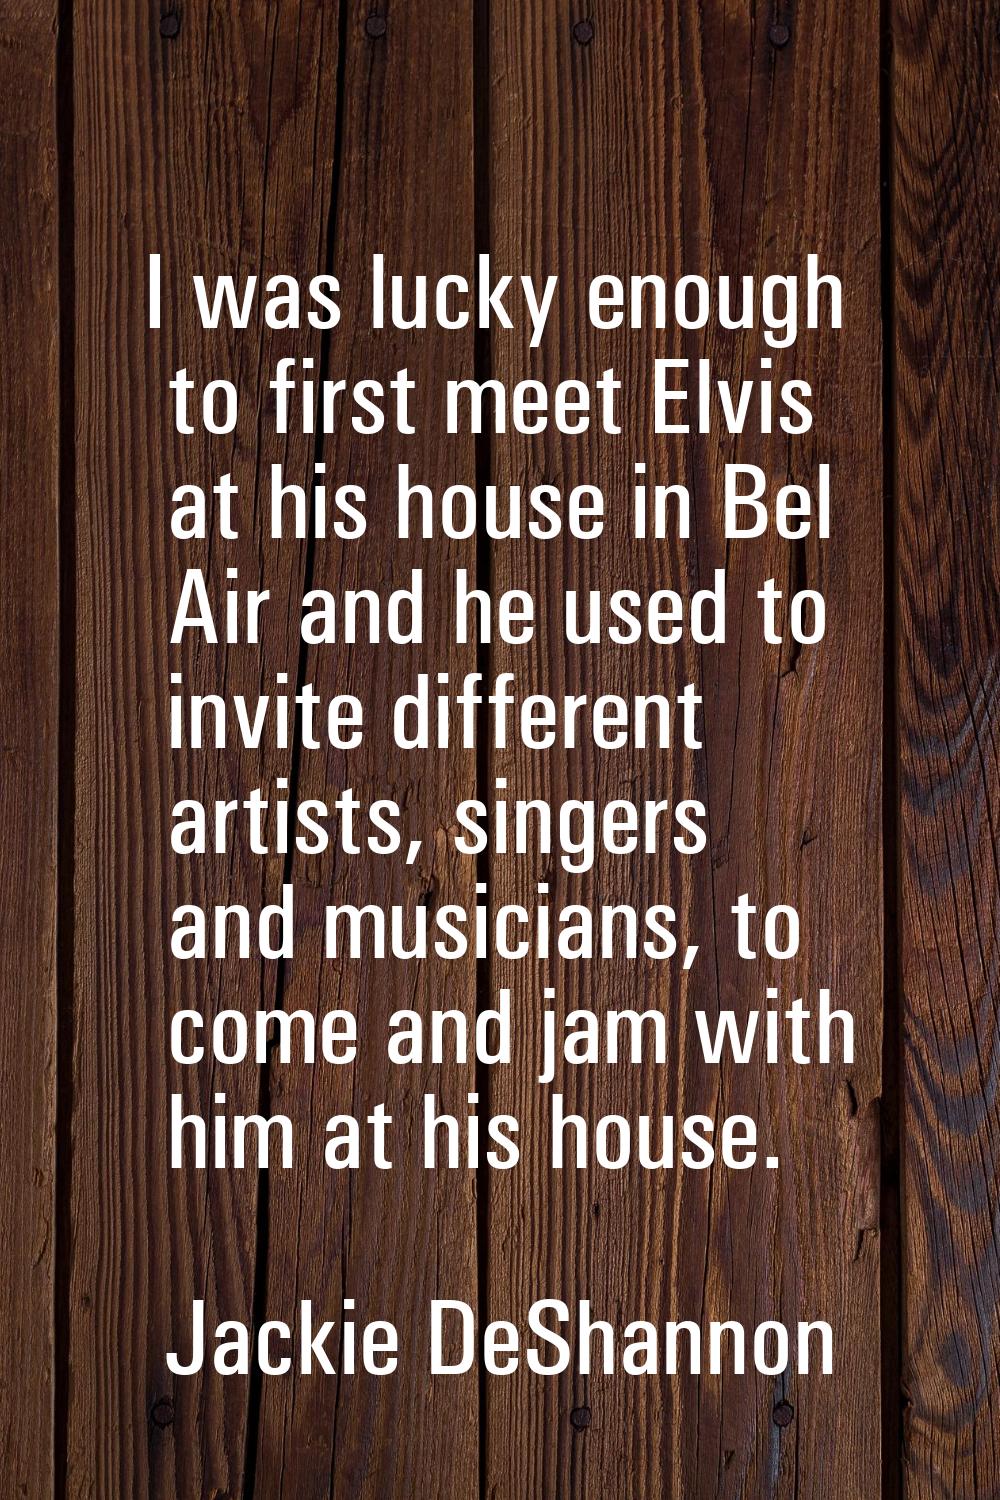 I was lucky enough to first meet Elvis at his house in Bel Air and he used to invite different arti